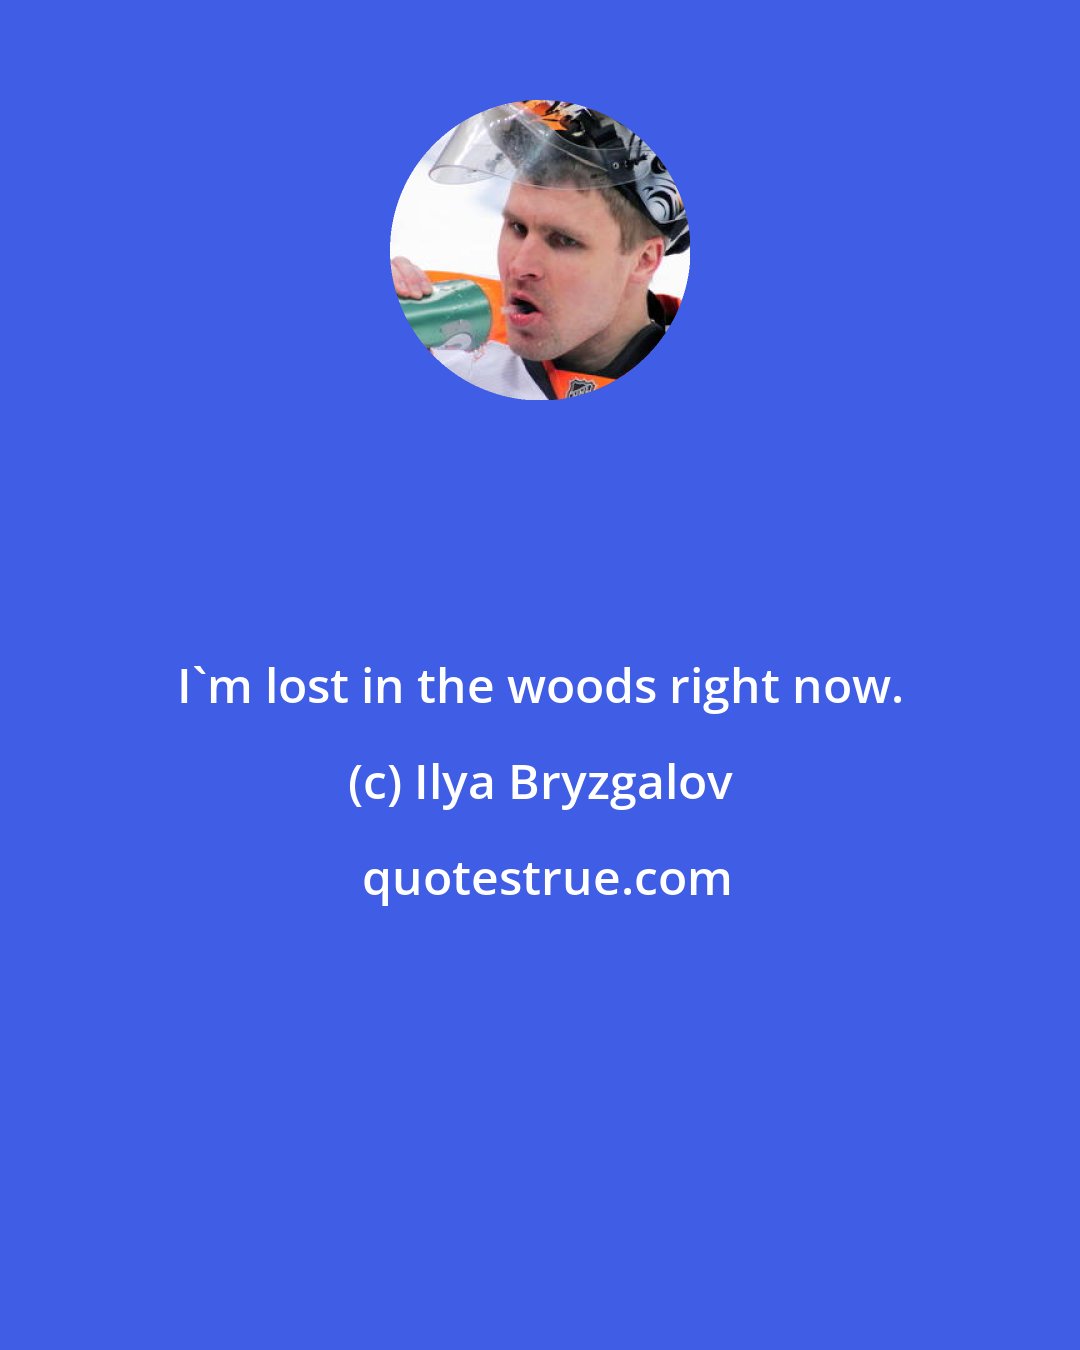 Ilya Bryzgalov: I'm lost in the woods right now.